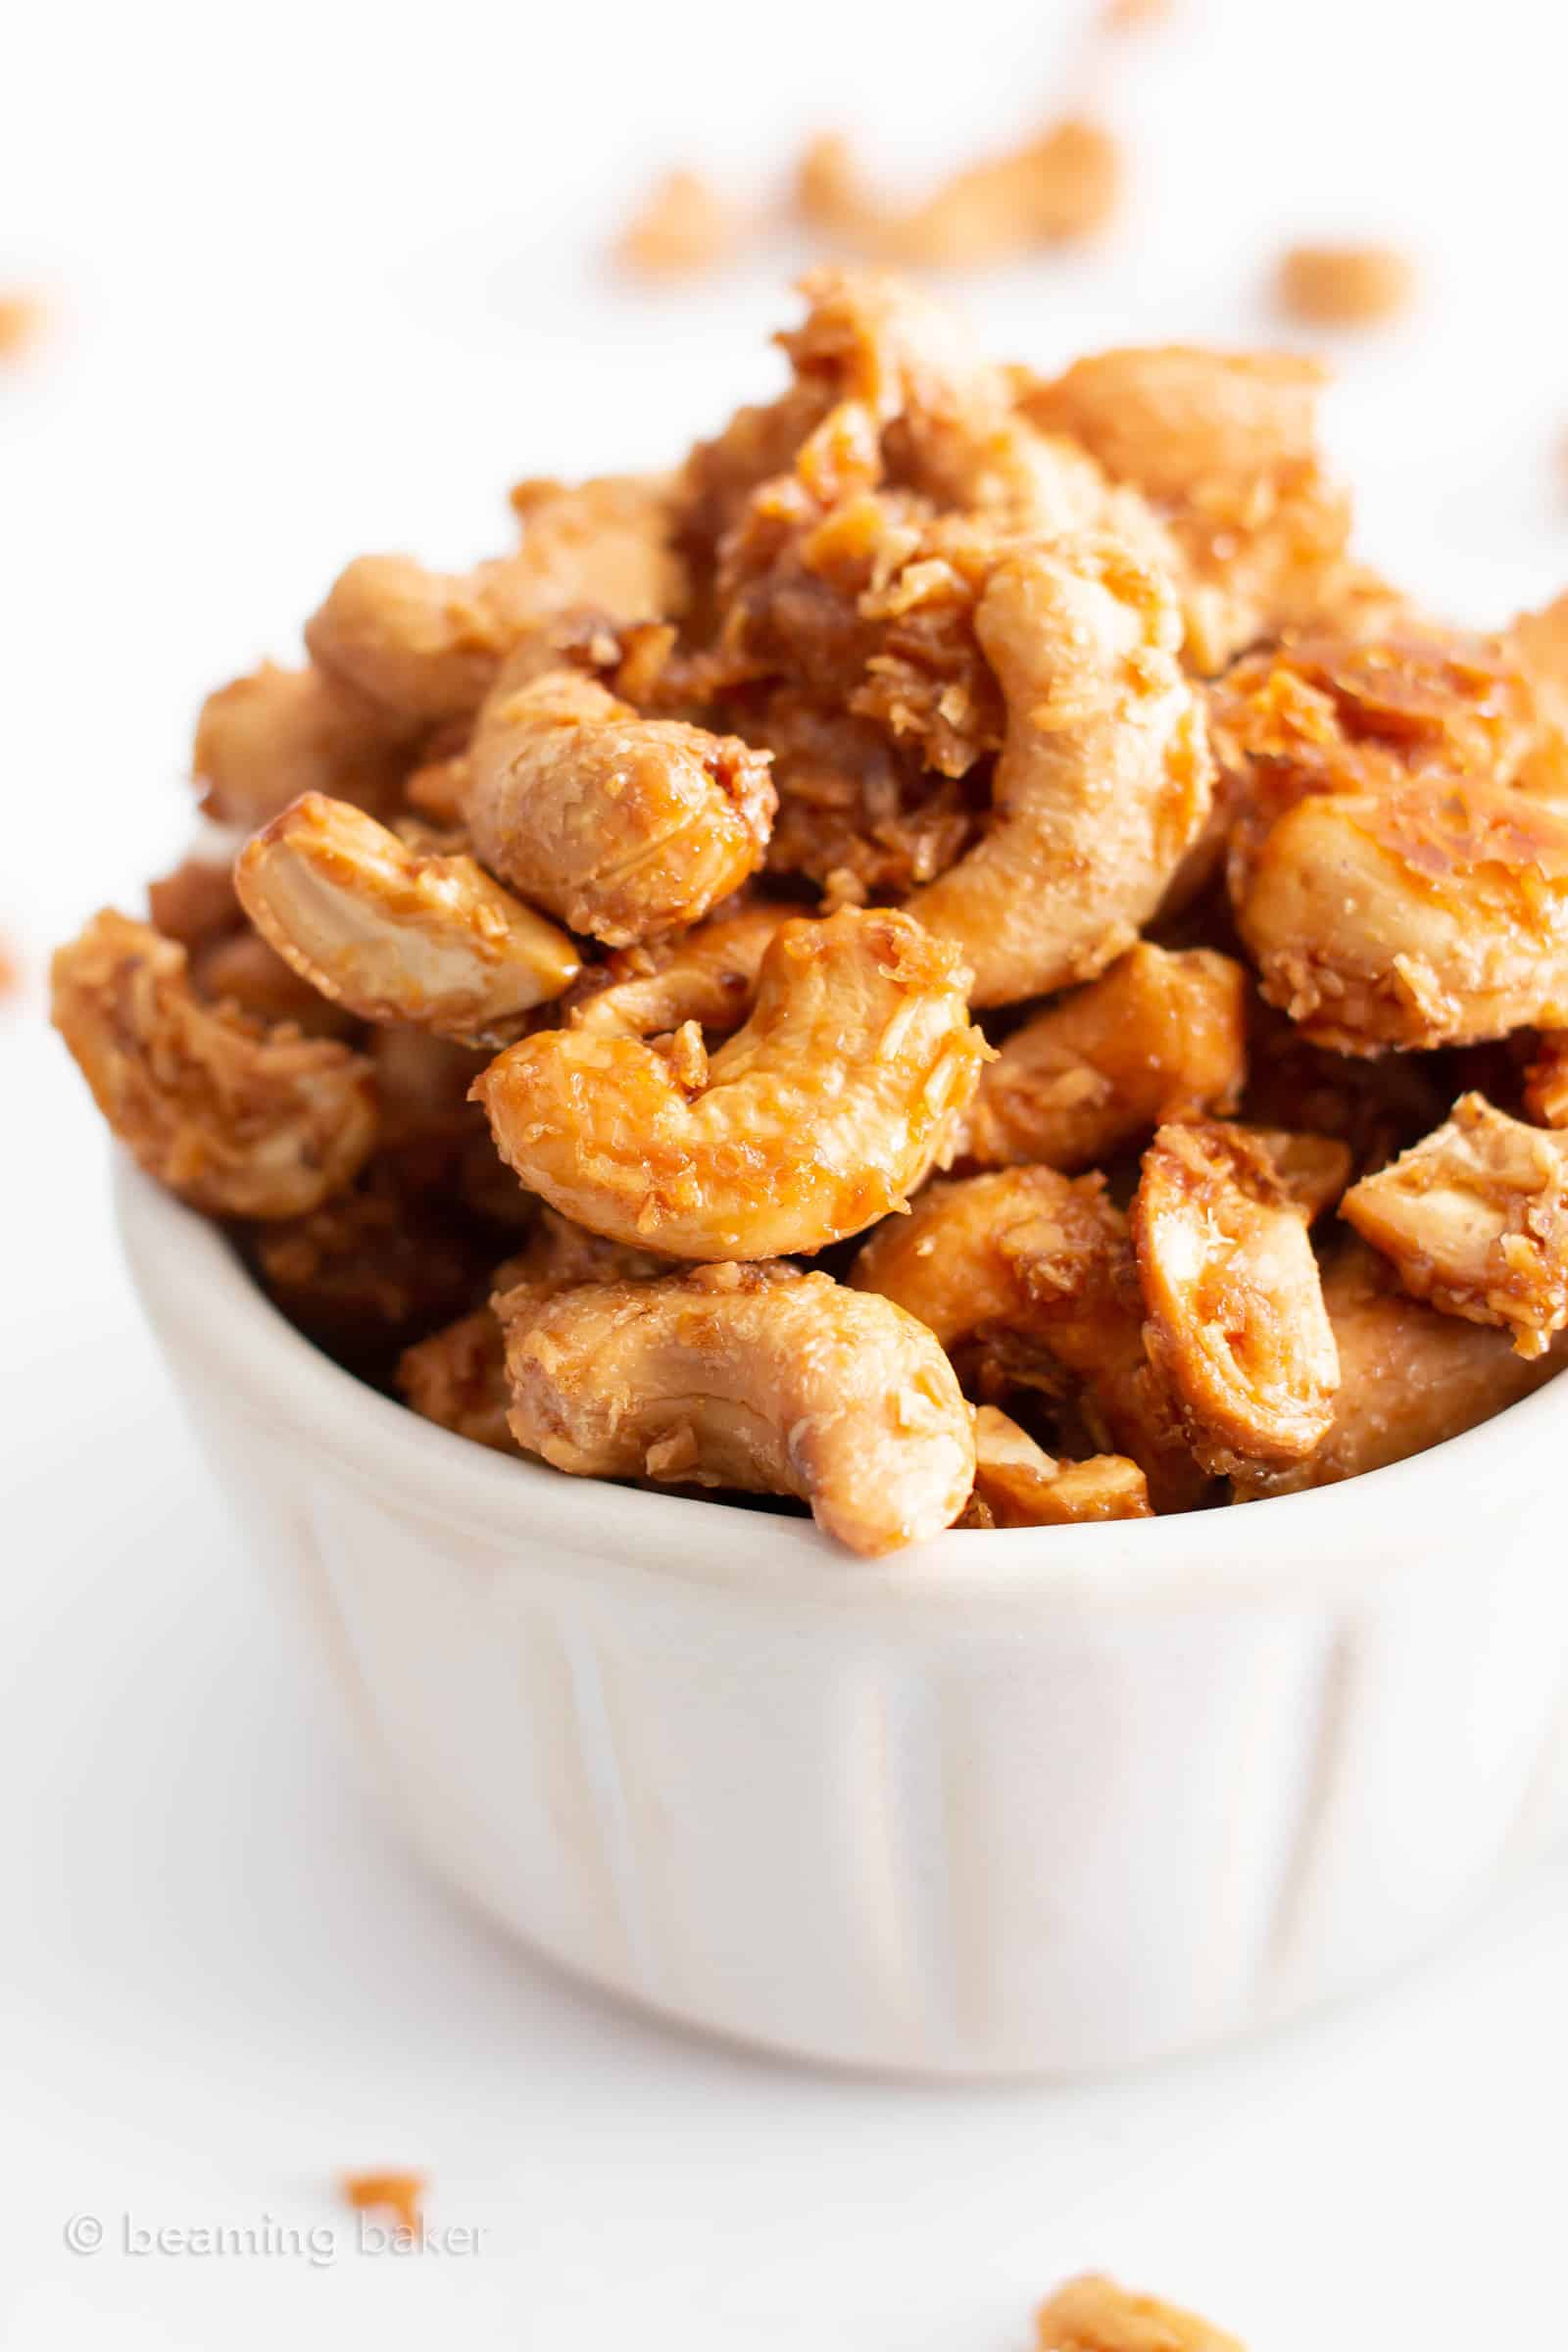 4 Ingredient Toasted Coconut Cashews Recipe (Paleo, GF): this vegan toasted coconut cashews recipe is gluten free & paleo! The crunchiest coconut coated roasted cashews, made with 4 ingredients. Dairy-Free. #Paleo #Cashews #Coconut #Vegan #GlutenFree | Recipe at BeamingBaker.com